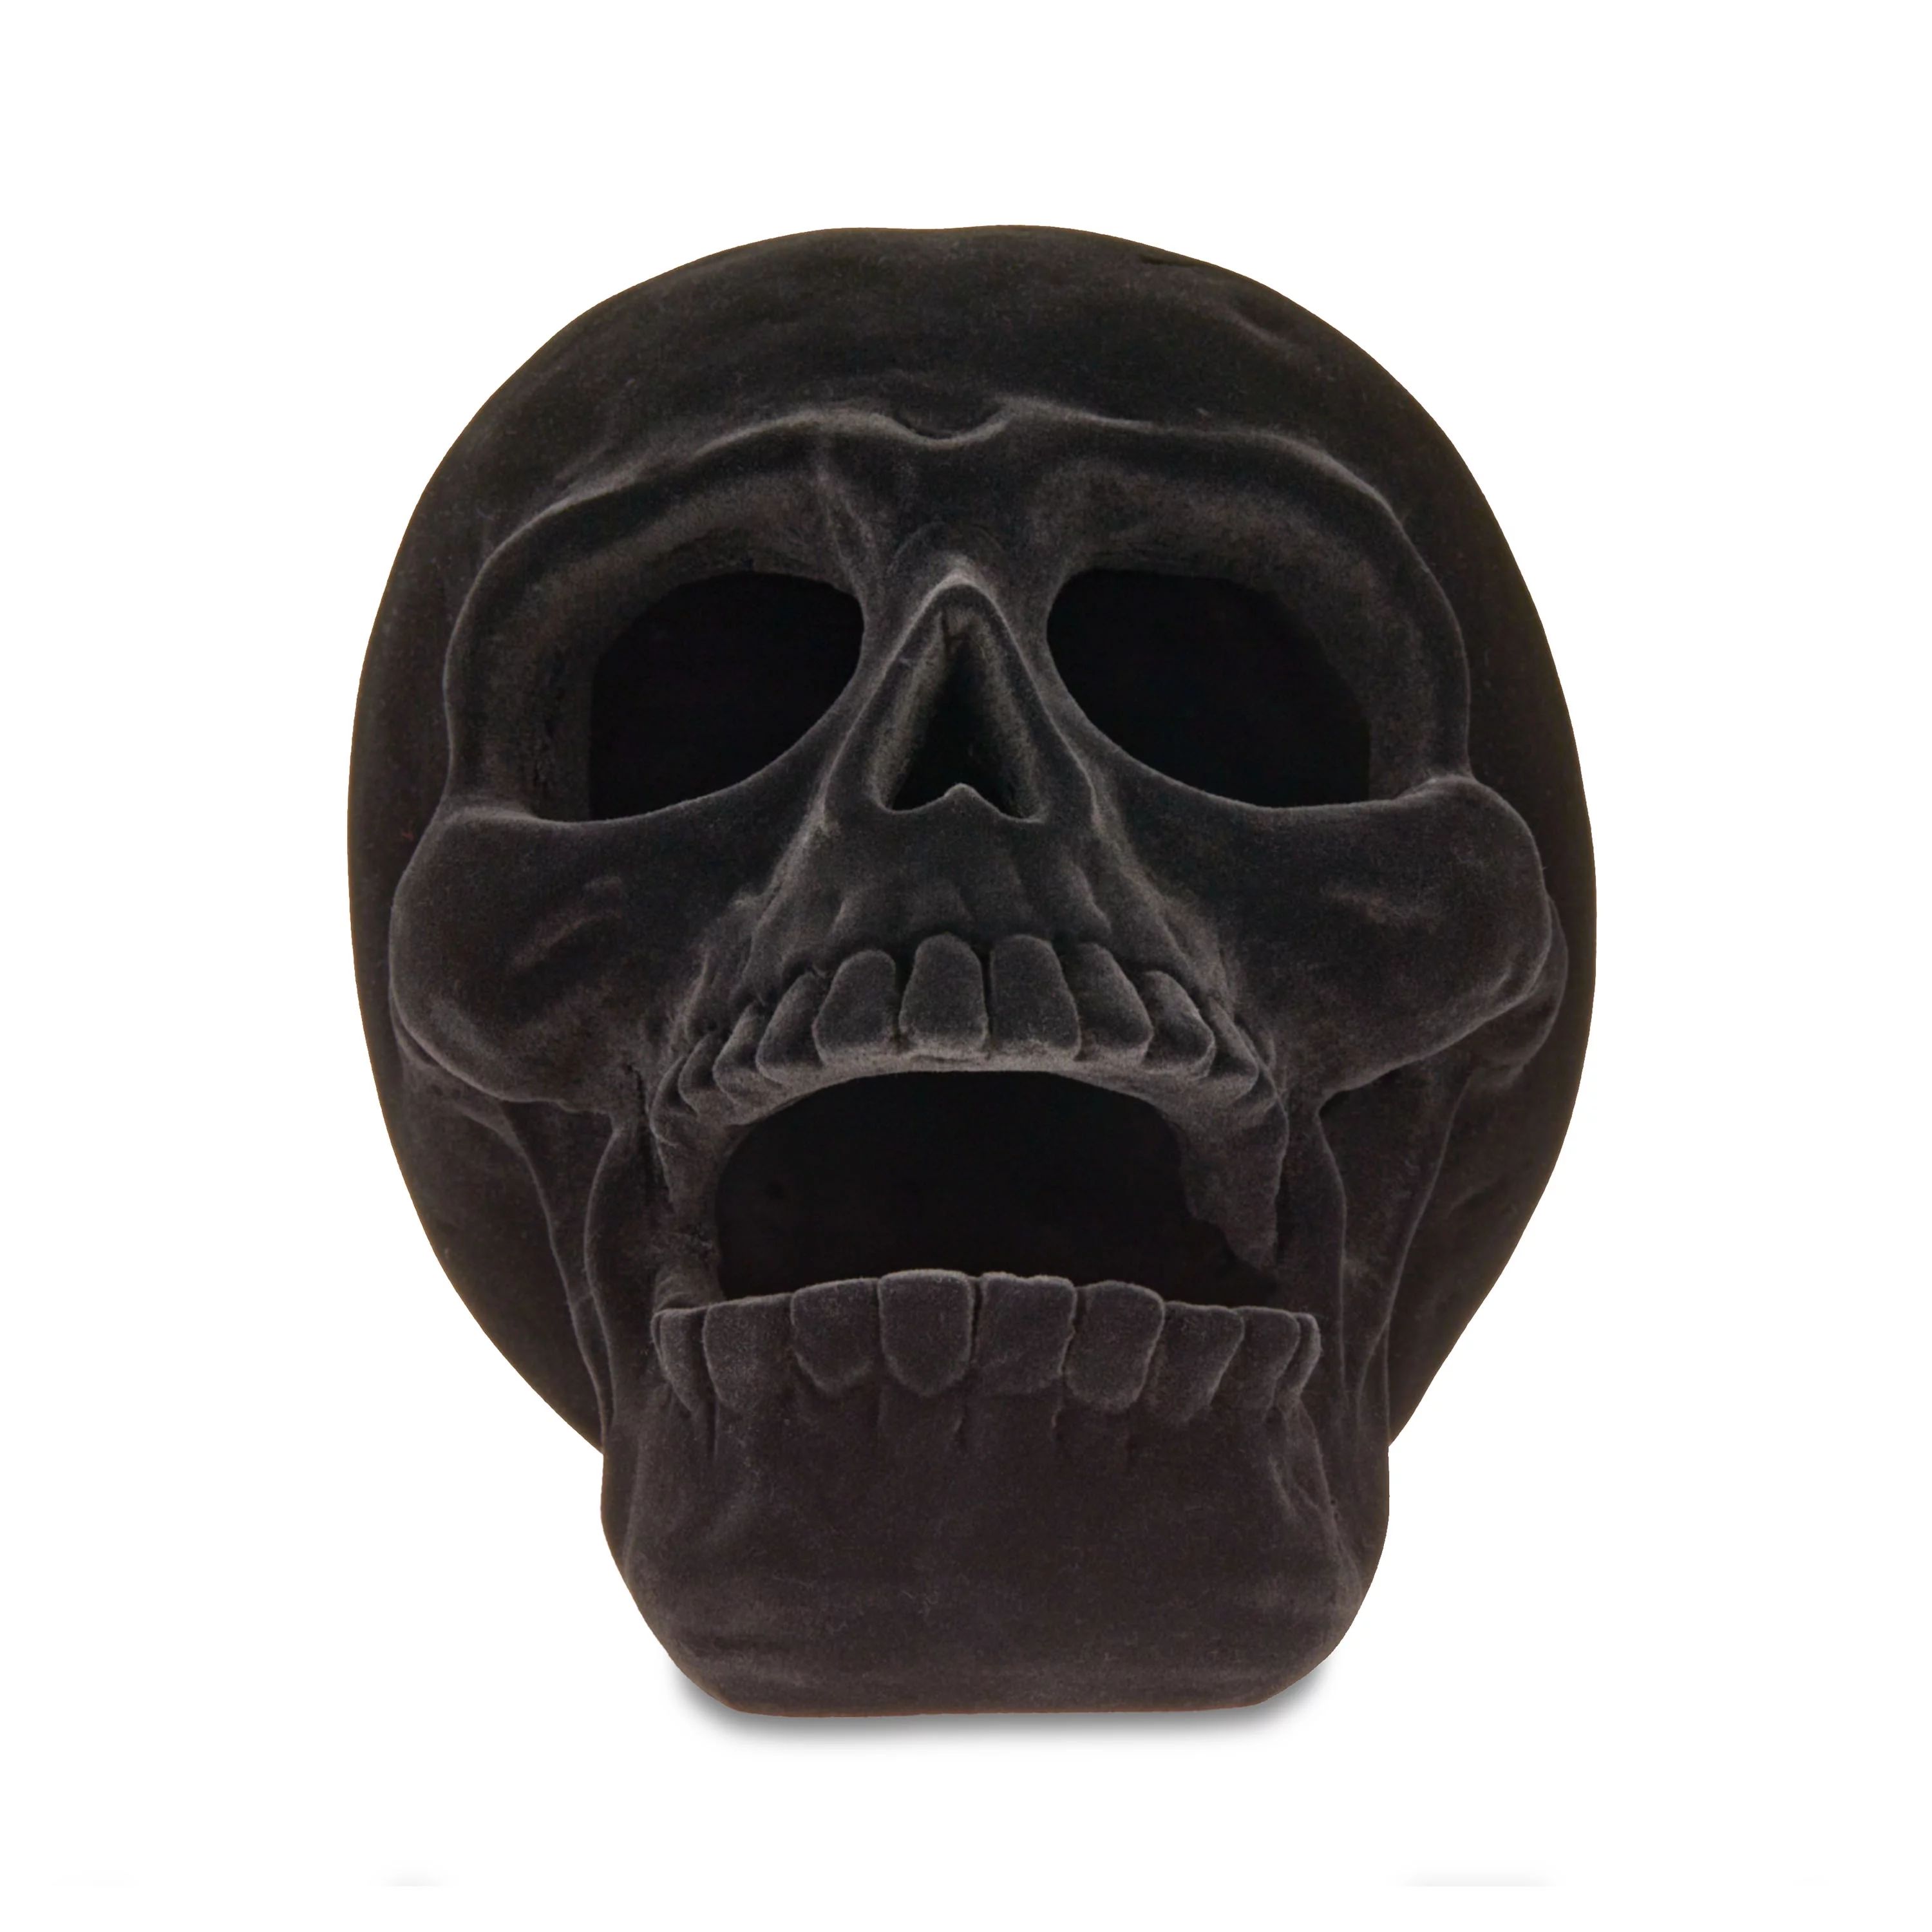 Halloween Large Black Flocked Resin Skull Decoration, 5.25 in x 7.75 in x 5.35 in, by Way To Cele... | Walmart (US)